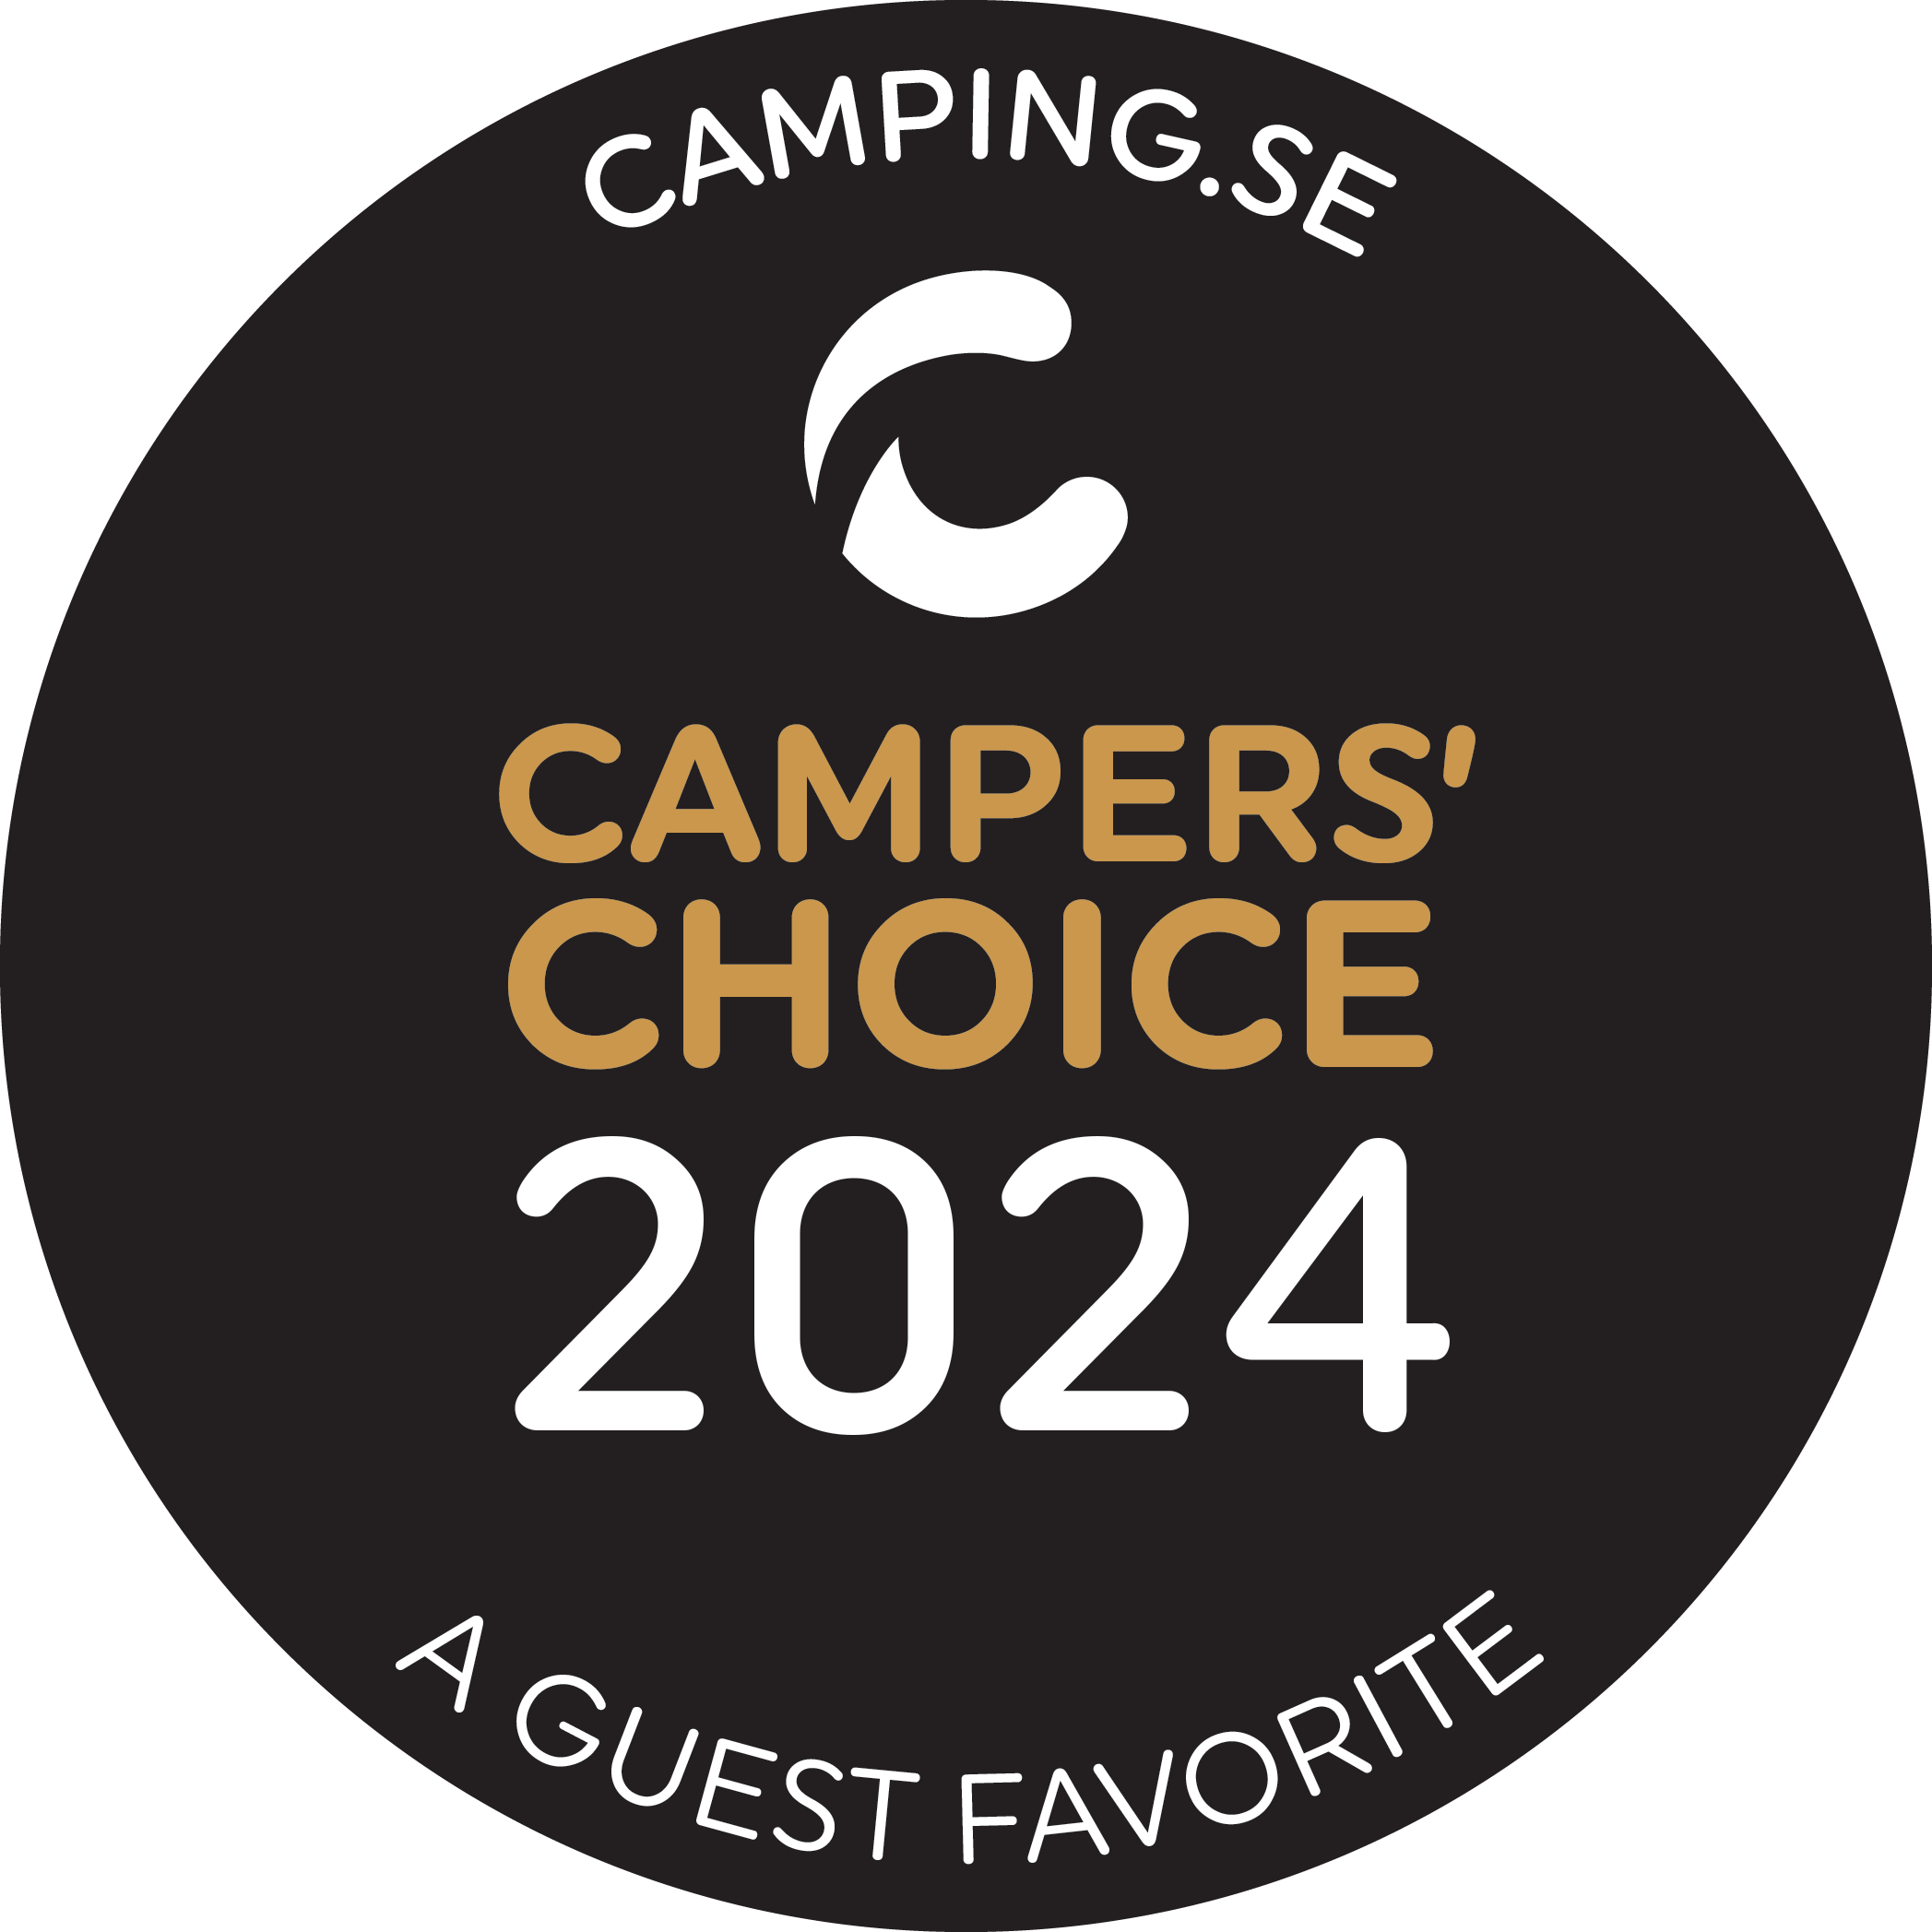 Camping.se Campers' Choice 2024.png